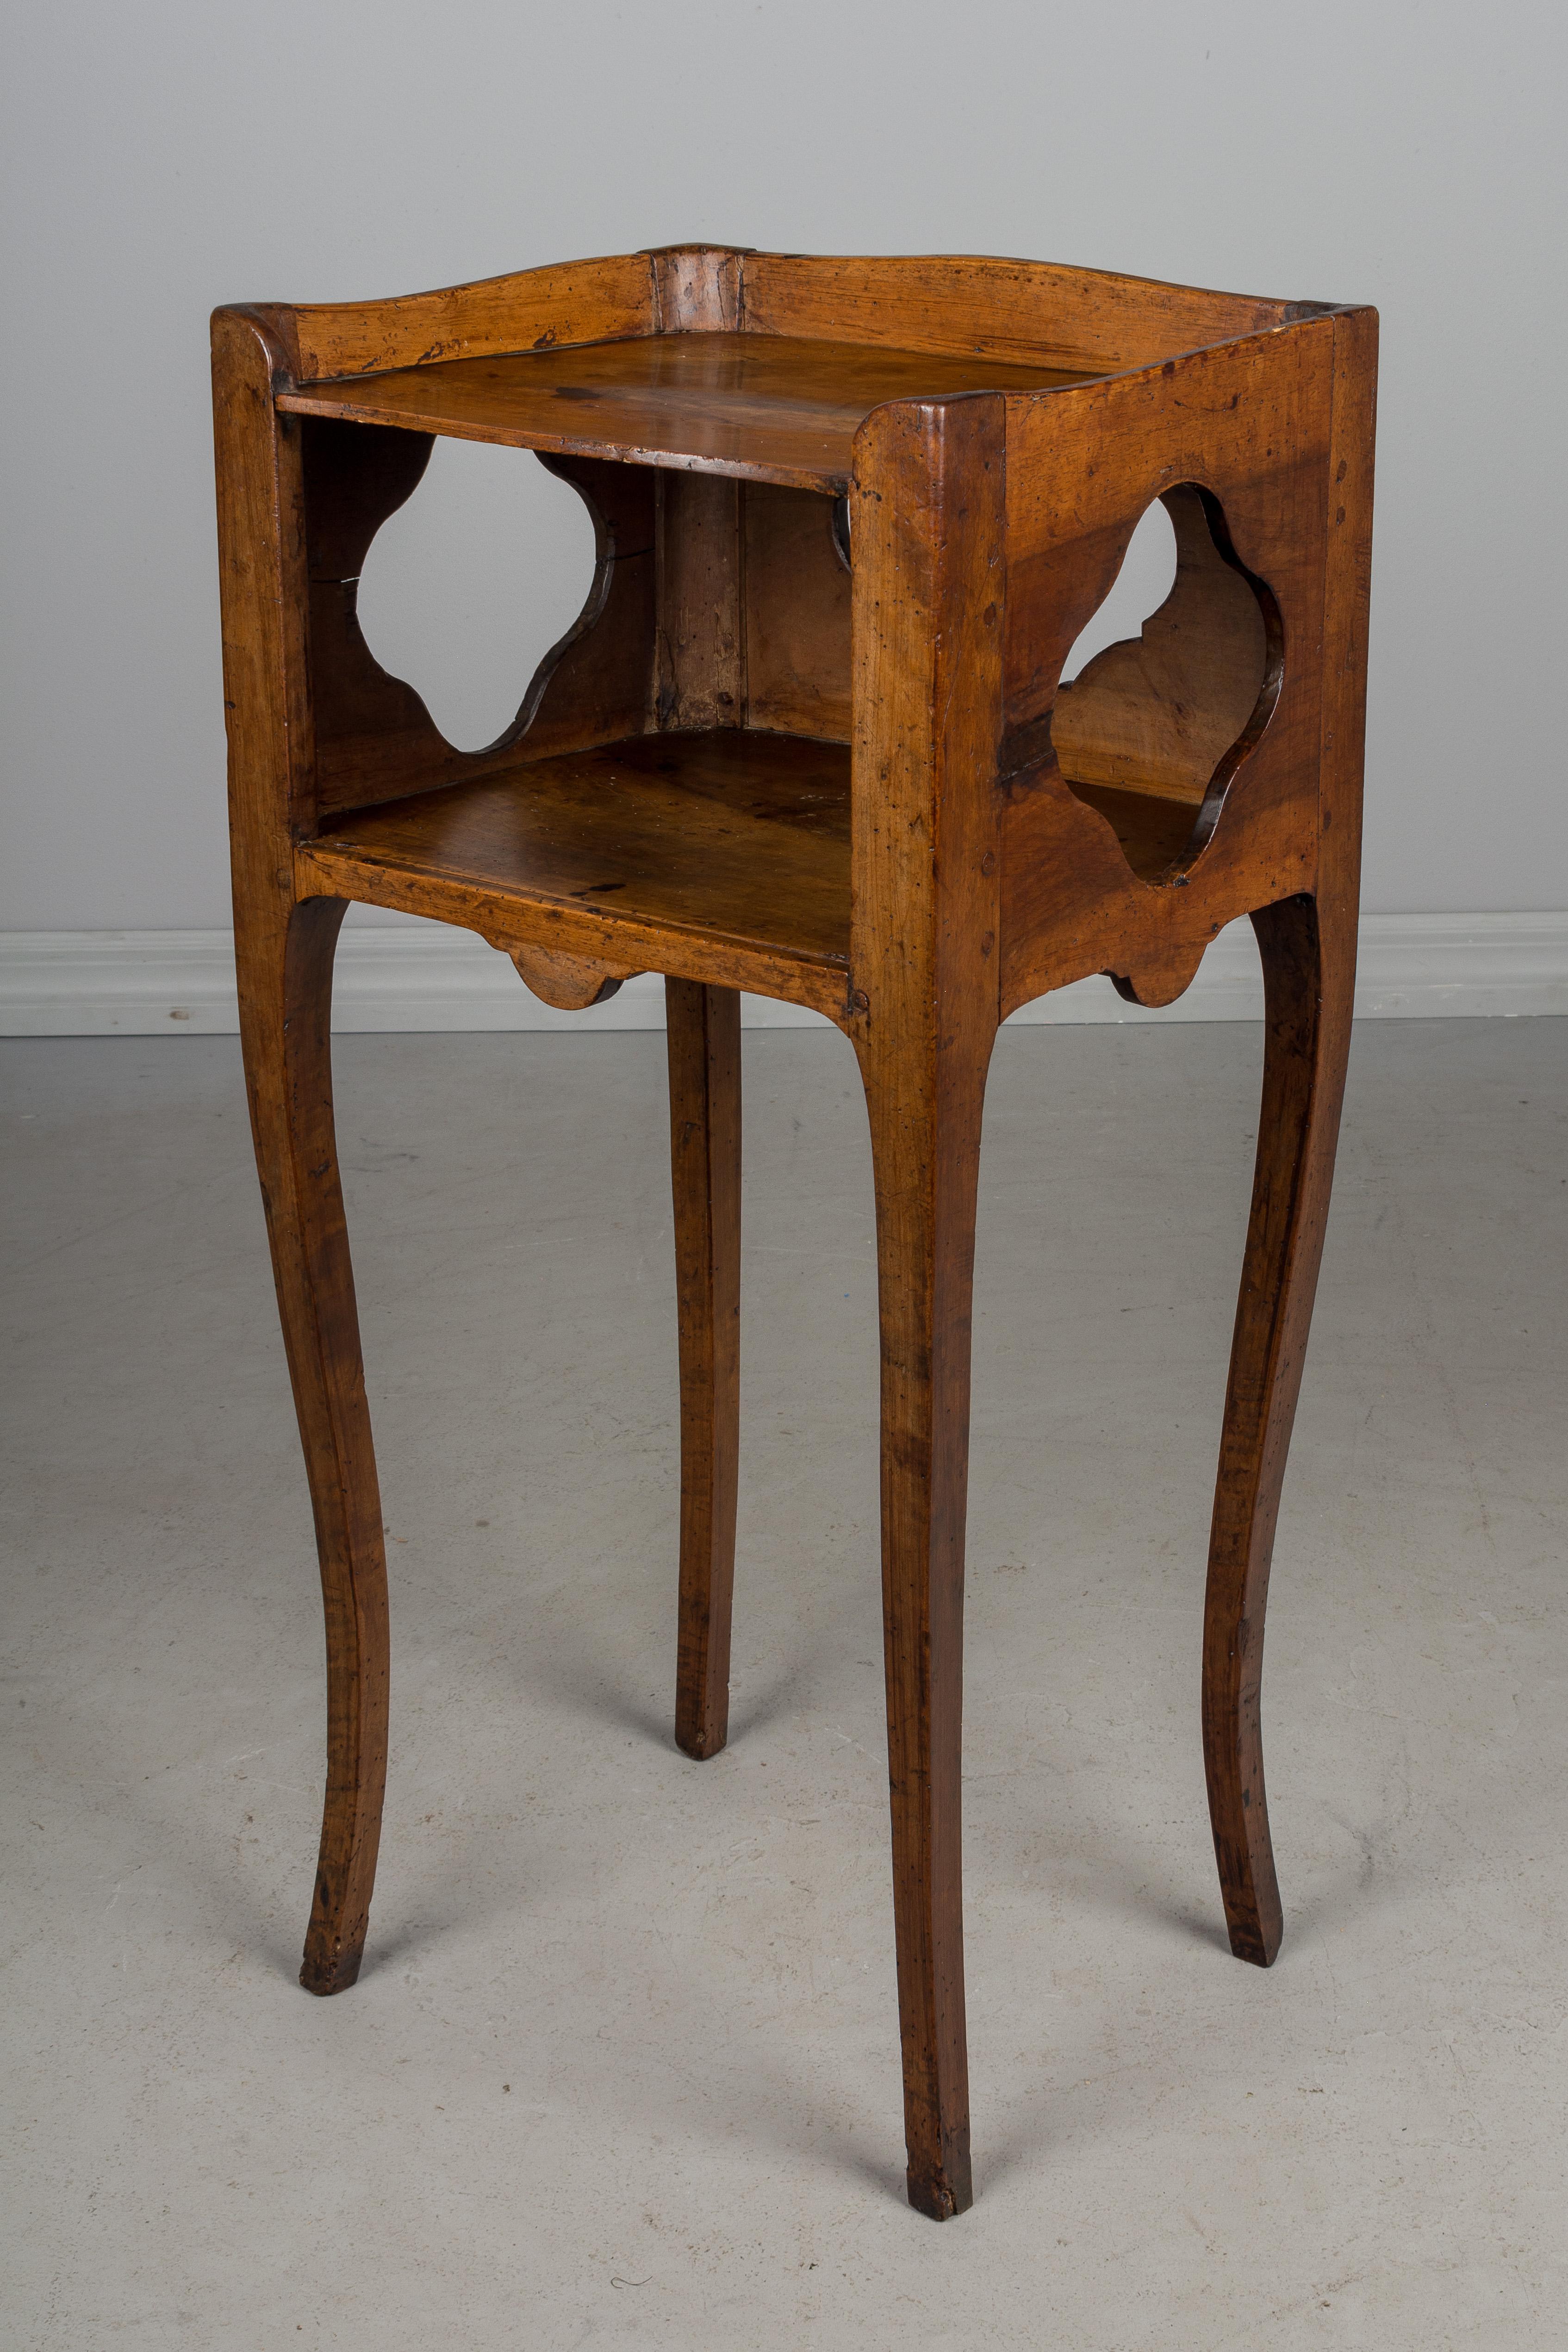 A late 18th century Louis XV country French Provencal side table or nightstand made of solid walnut, with a pierced quatrefoil shape cut-out on the sides and on the back. Scalloped apron and gallery surrounding the upper shelf. Slender curved legs.